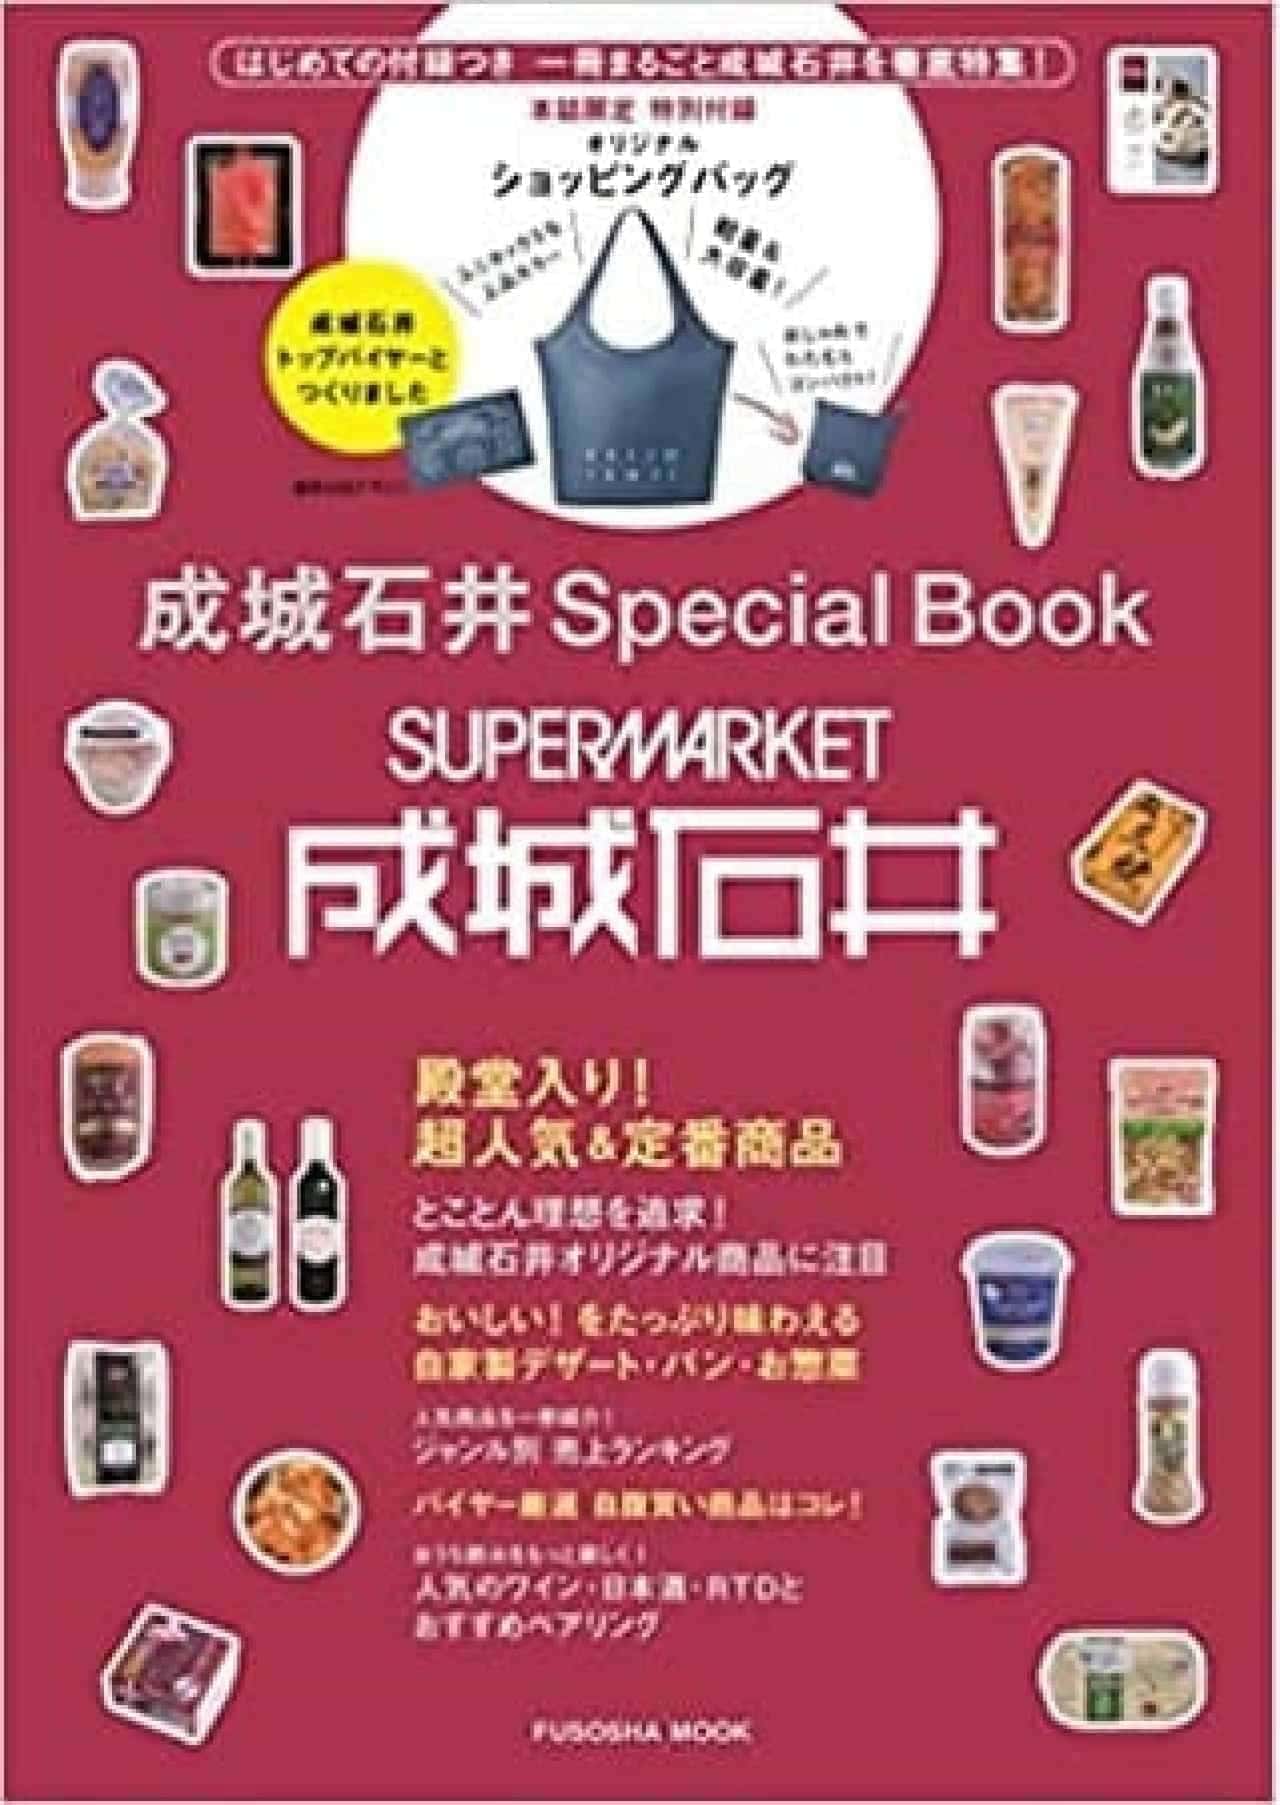 Seijo Ishii Special Book" with original shopping bag -- includes catalog of super popular and classic products, popular breads, etc.